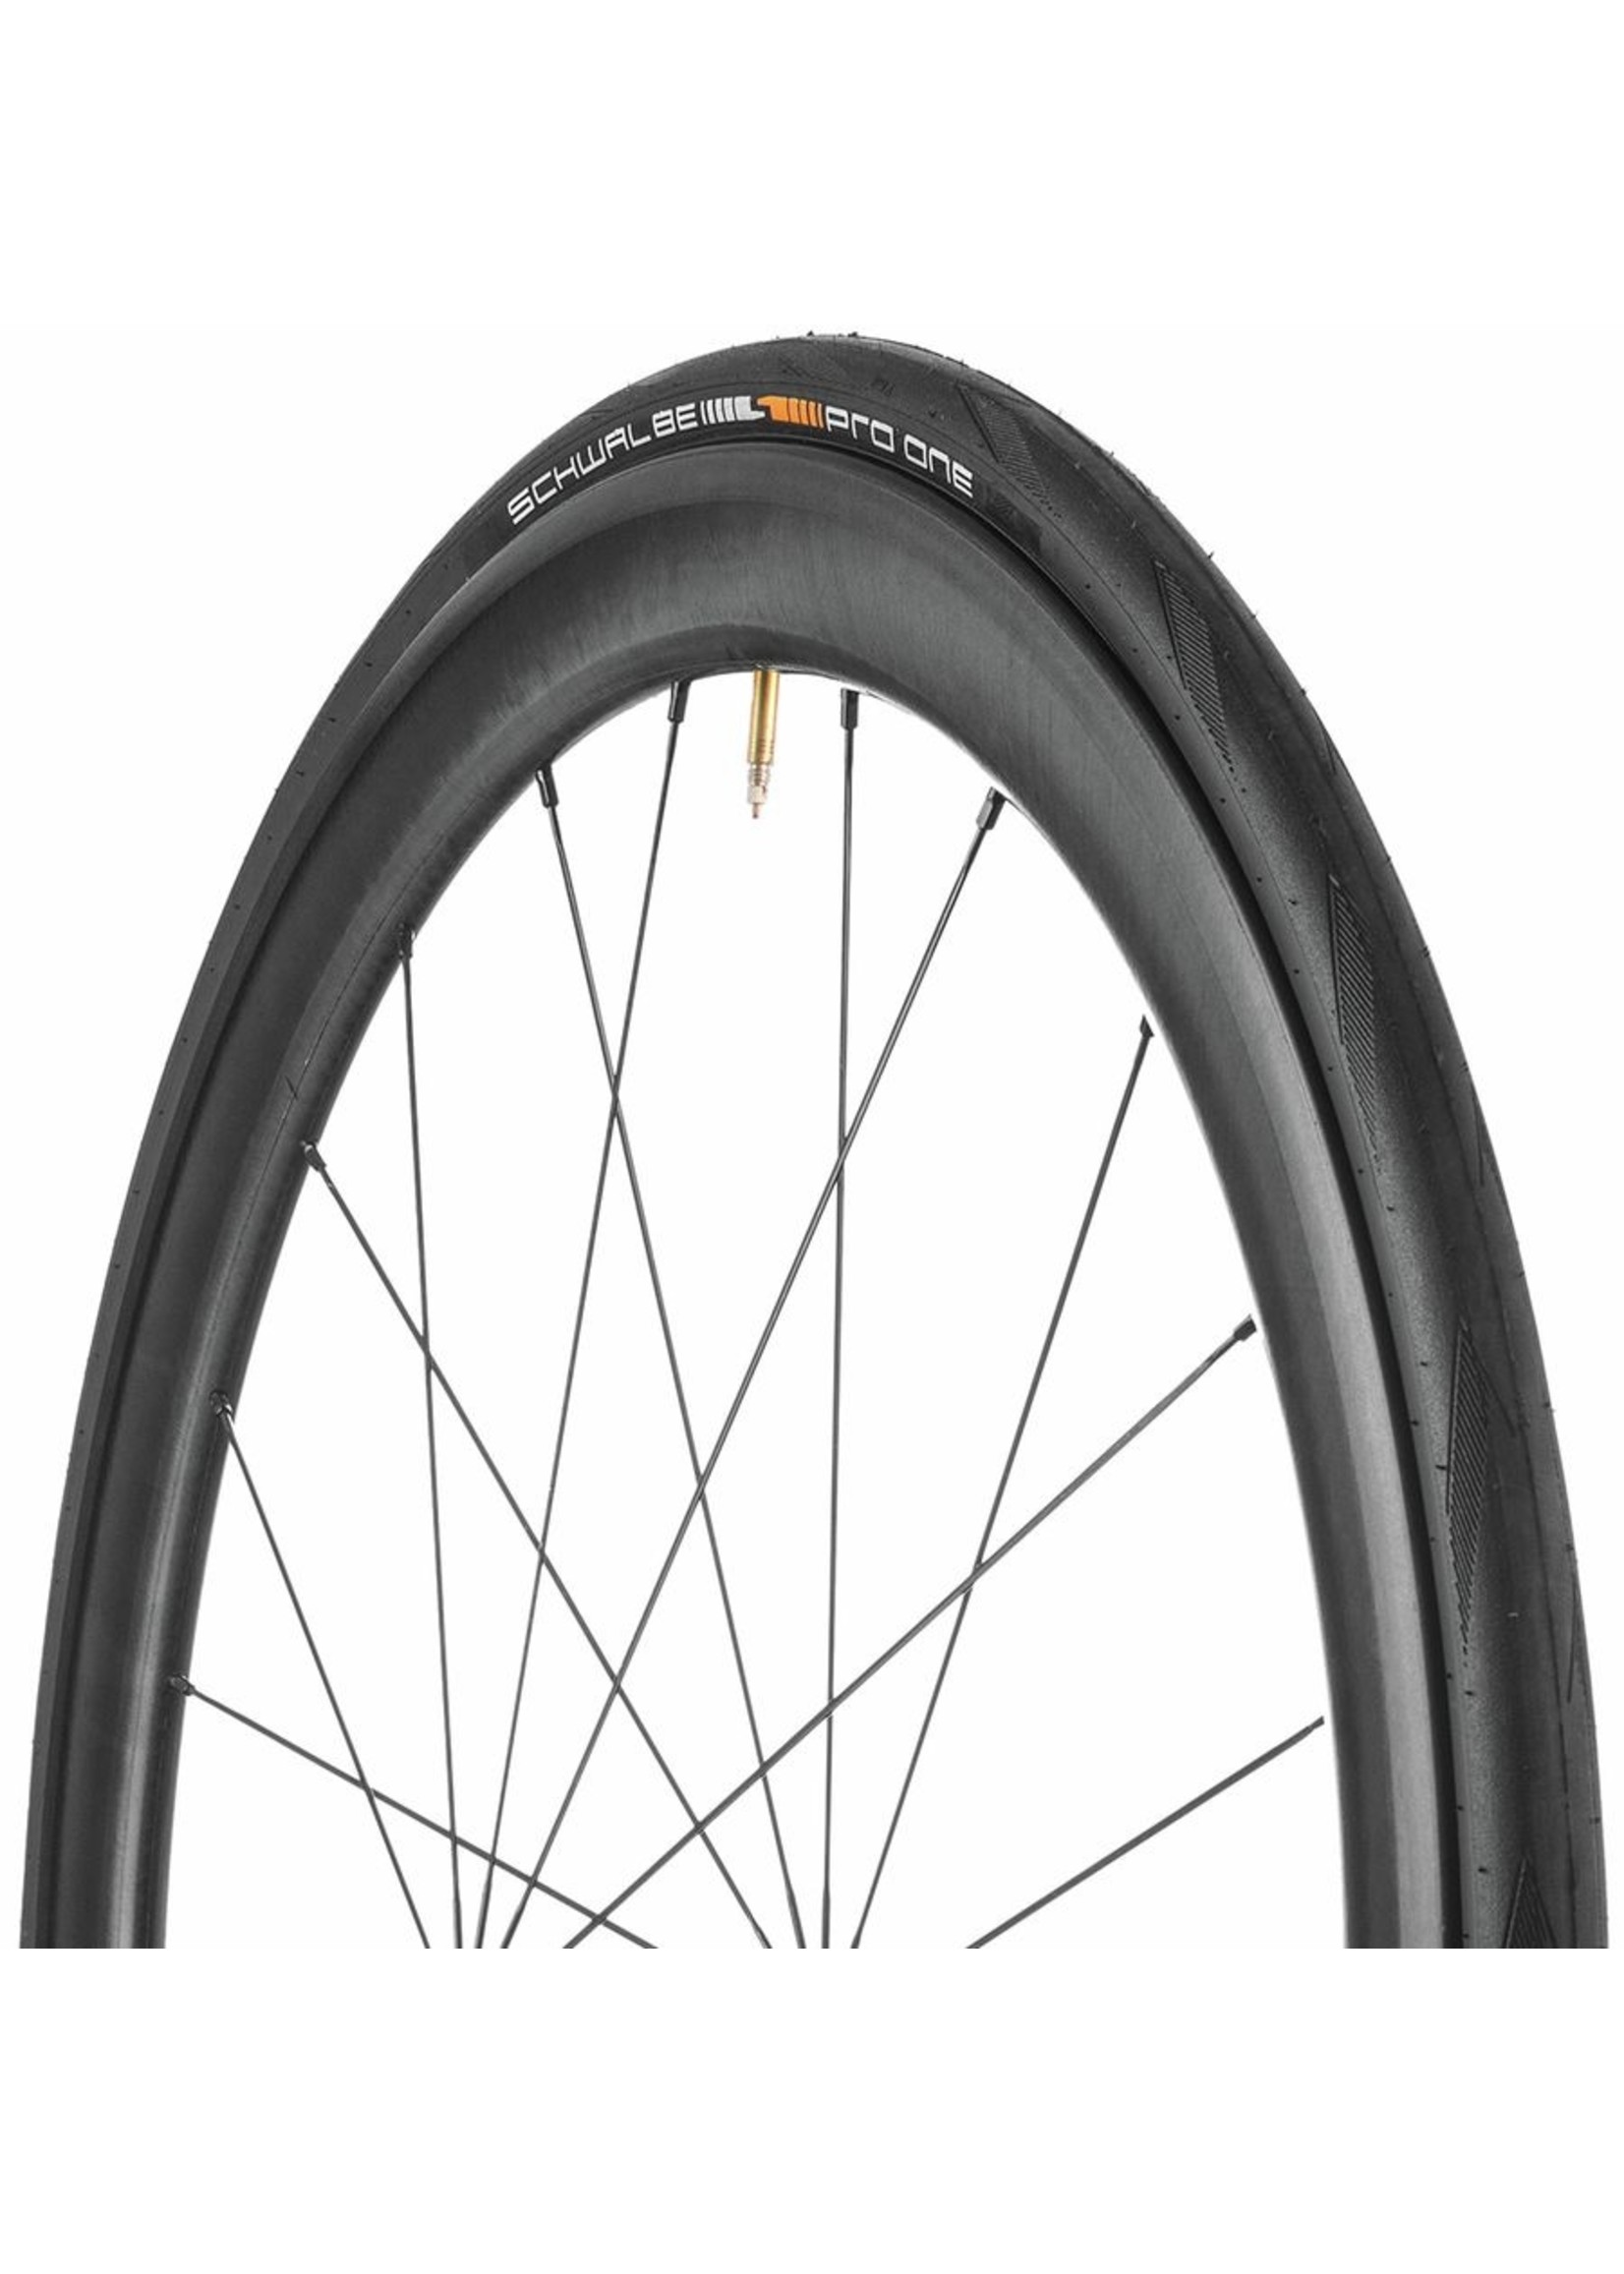 Schwalbe Schwalbe Pro One Tubeless Road Tire, 700 x 25 Folding Bead Black with OneStar Compound and MicroSkin Casing